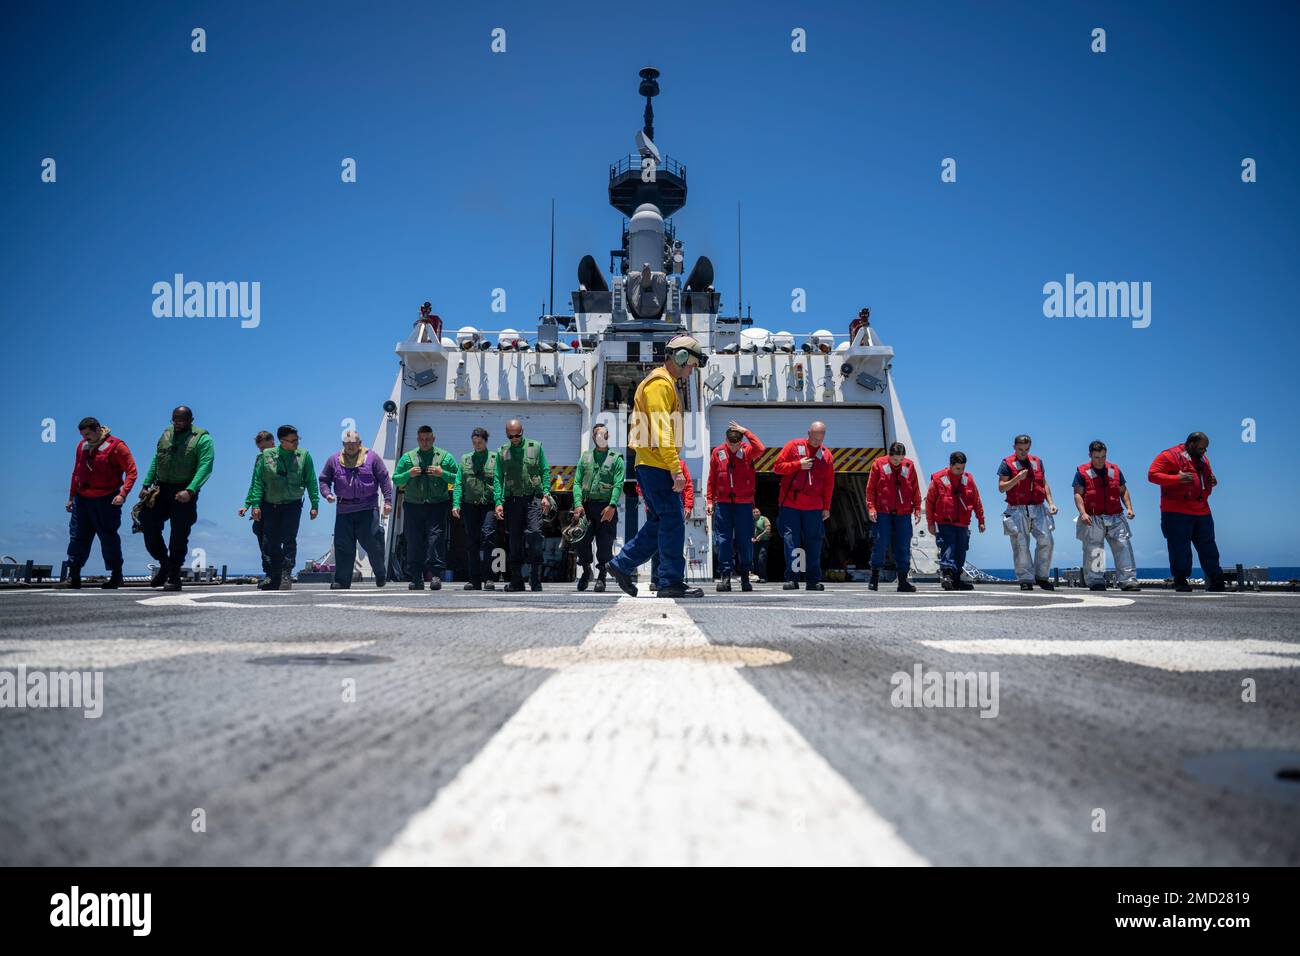 PACIFIC OCEAN (July 13, 2022) U.S. Coast Guard crew members aboard Legend-class cutter USCGC Midgett (WMSL 757) and U.S. Navy Sailors check the flight deck for debris prior to flight operations during Rim of the Pacific (RIMPAC) 2022. Twenty-six nations, 38 ships, four submarines, more than 170 aircraft and 25,000 personnel are participating in RIMPAC from June 29 to Aug. 4 in and around the Hawaiian Islands and Southern California. The worlds largest international maritime exercise, RIMPAC provides a unique training opportunity while fostering and sustaining cooperative relationships among pa Stock Photo